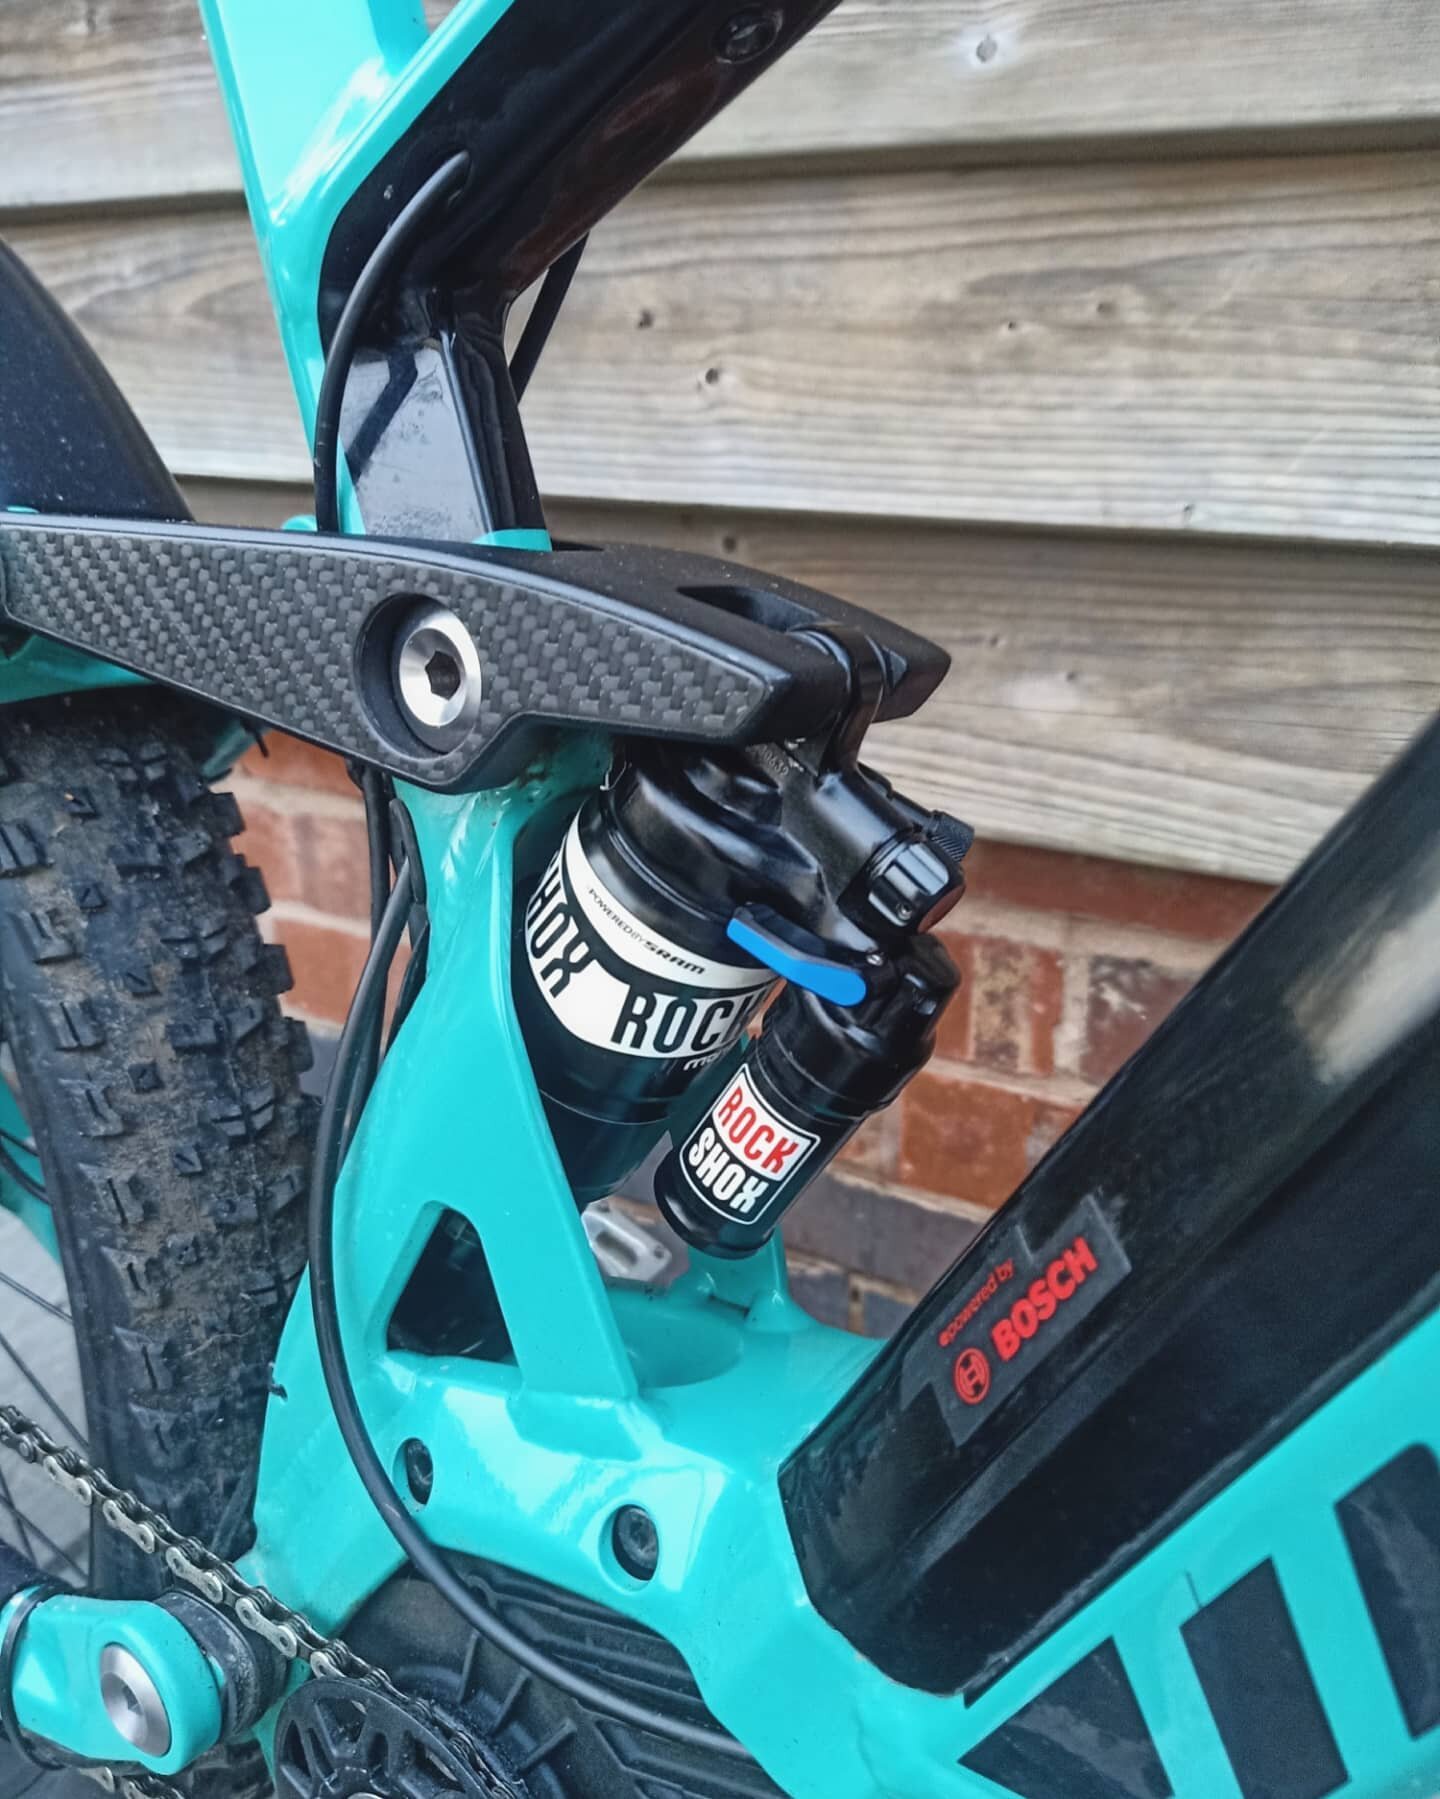 @rockshox service + fresh brake bleed for this @moustachebikes. 

A few 'small job' slots left for next week. If you're interested call for a chat and let's see what we can do.

#mtblife #downhillmtb #moustache #bikes #rockshox #650bplus #ebike #bosc